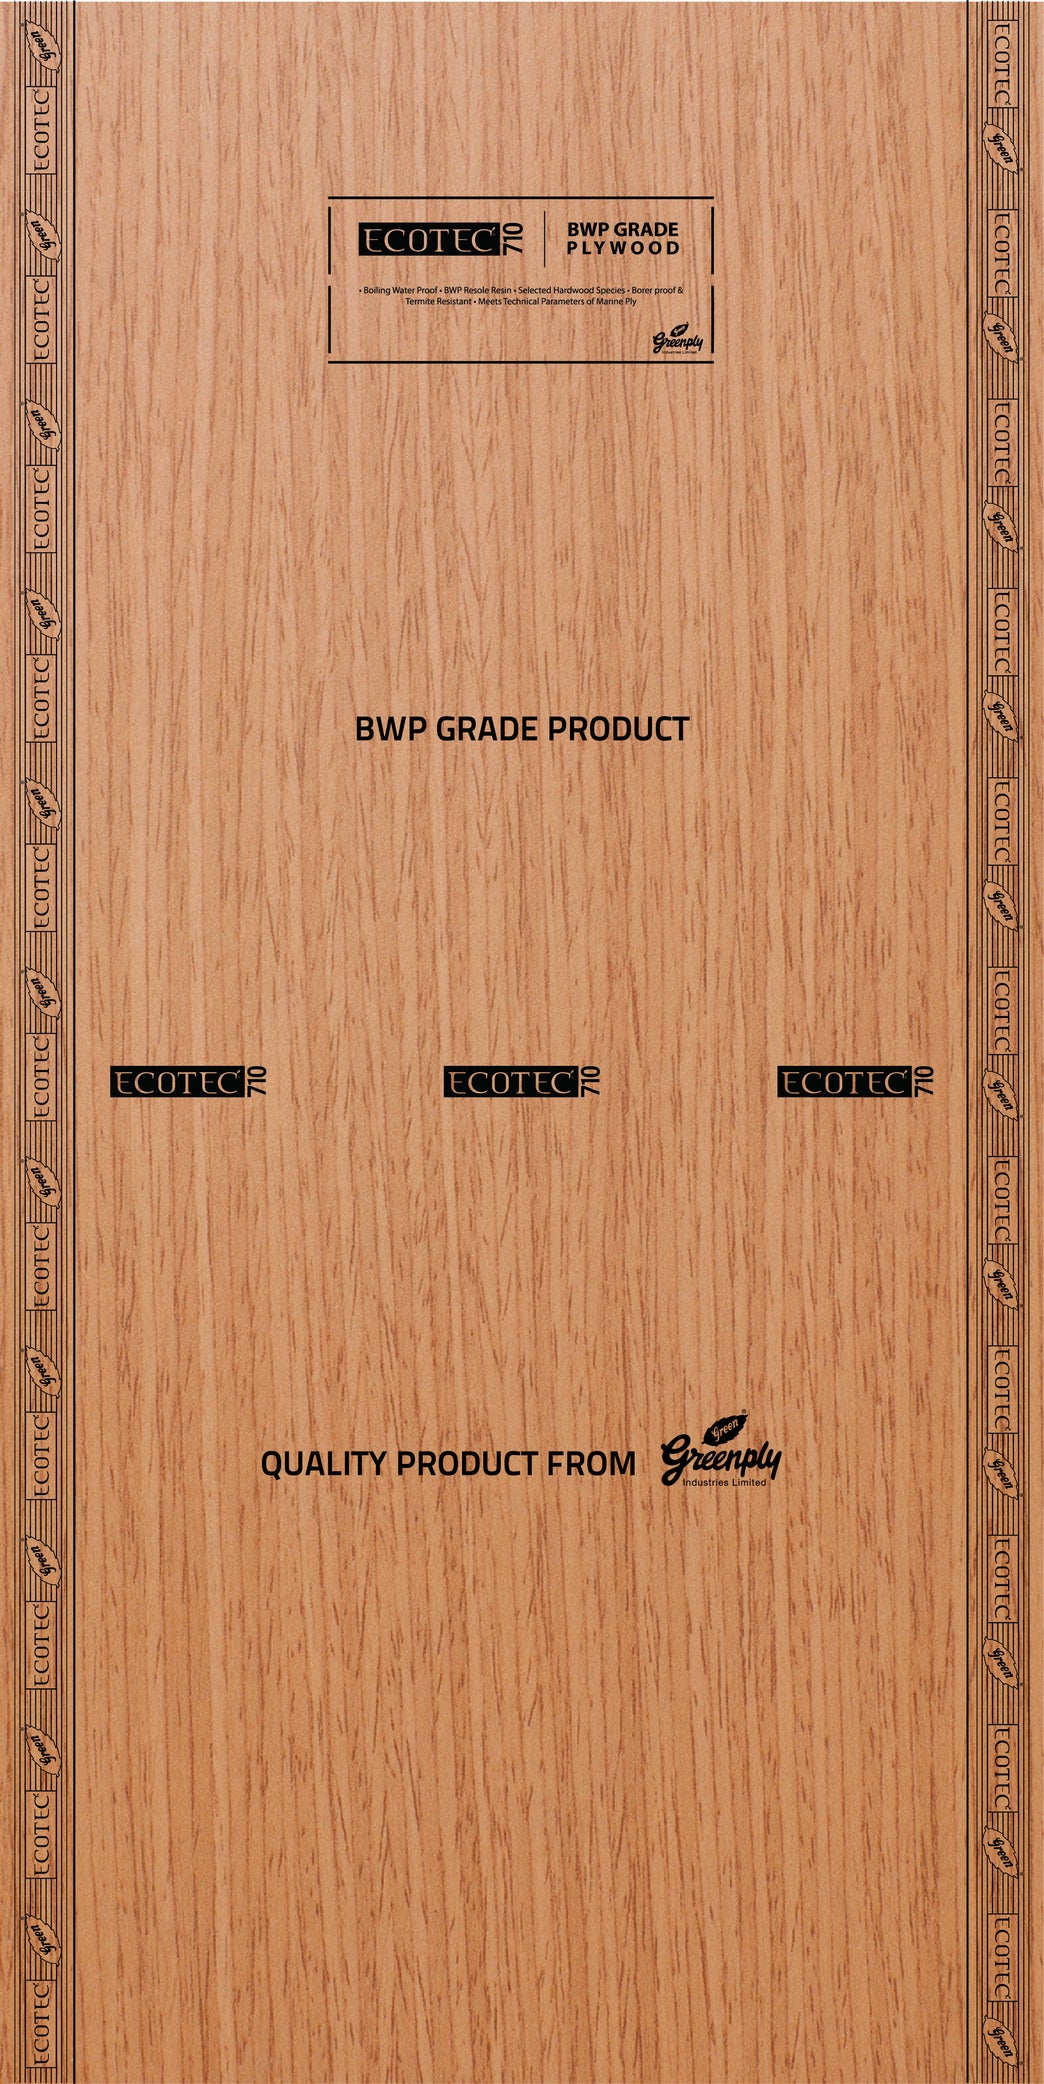 Greenply Ecotec Bwp Grade Plywood  Thickness 6 Mm Plywood